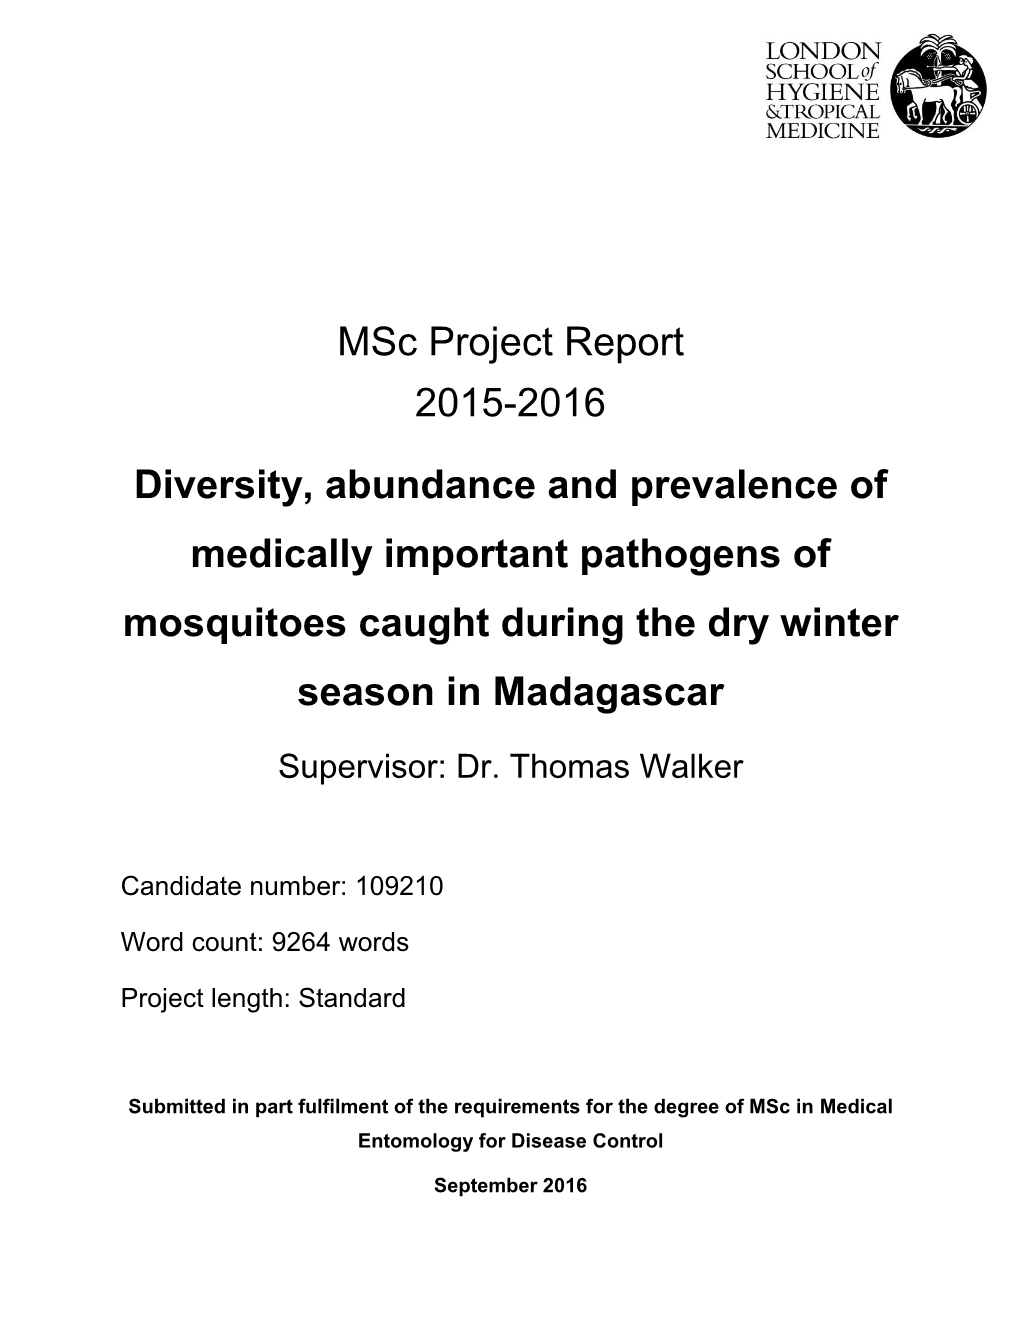 Diversity, Abundance and Prevalence of Medically Important Pathogens of Mosquitoes Caught During the Dry Winter Season in Madagascar